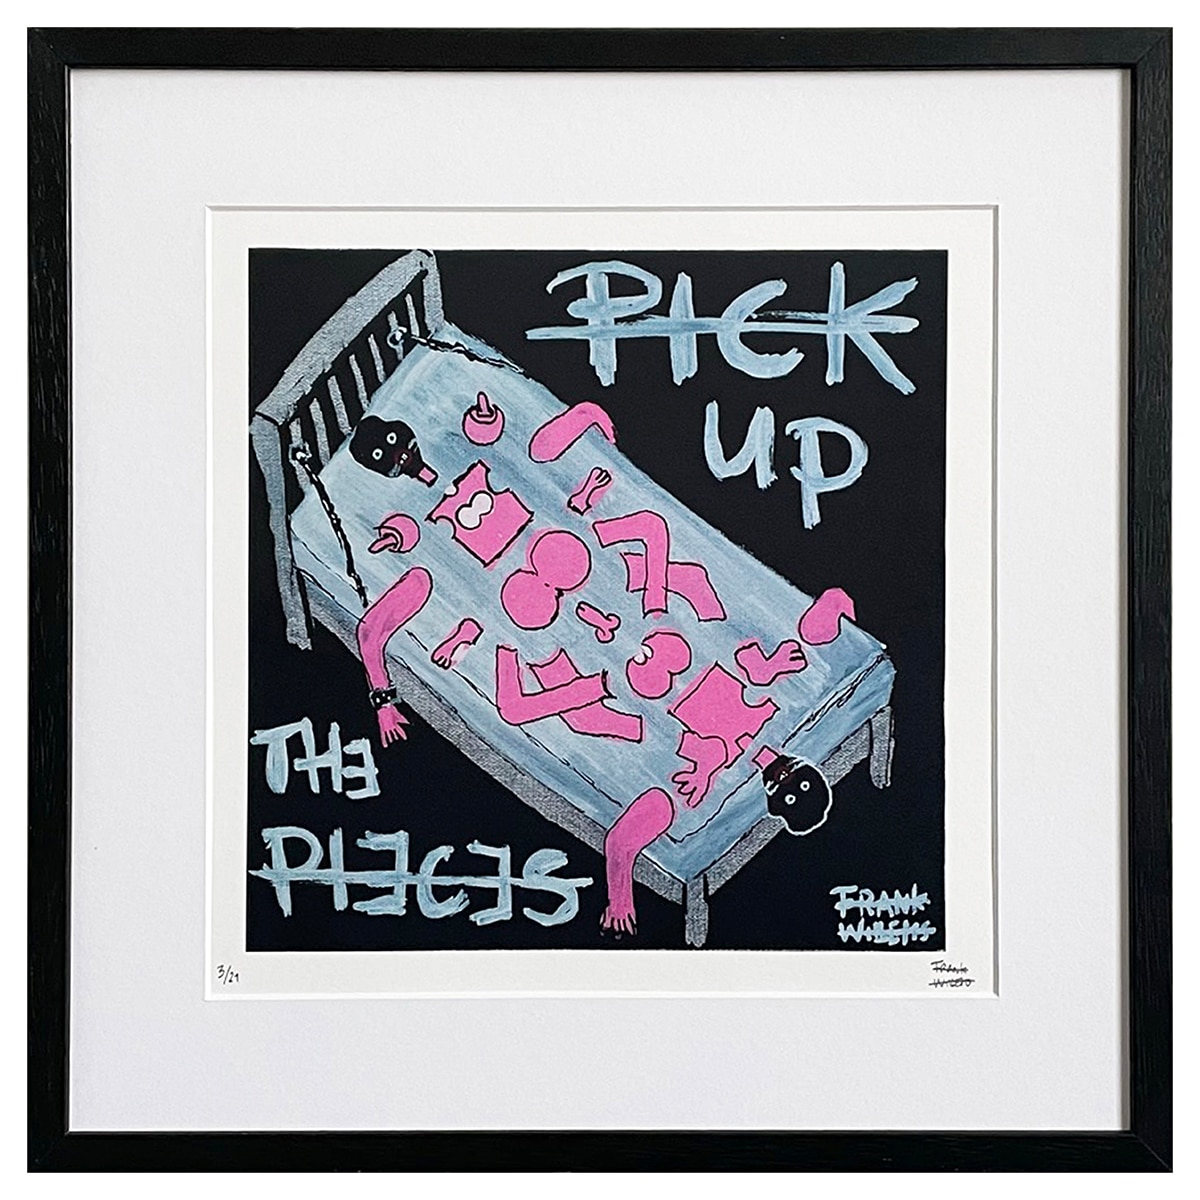 Limited Edt Art Prints - PICK UP THE PIECES - Frank Willems